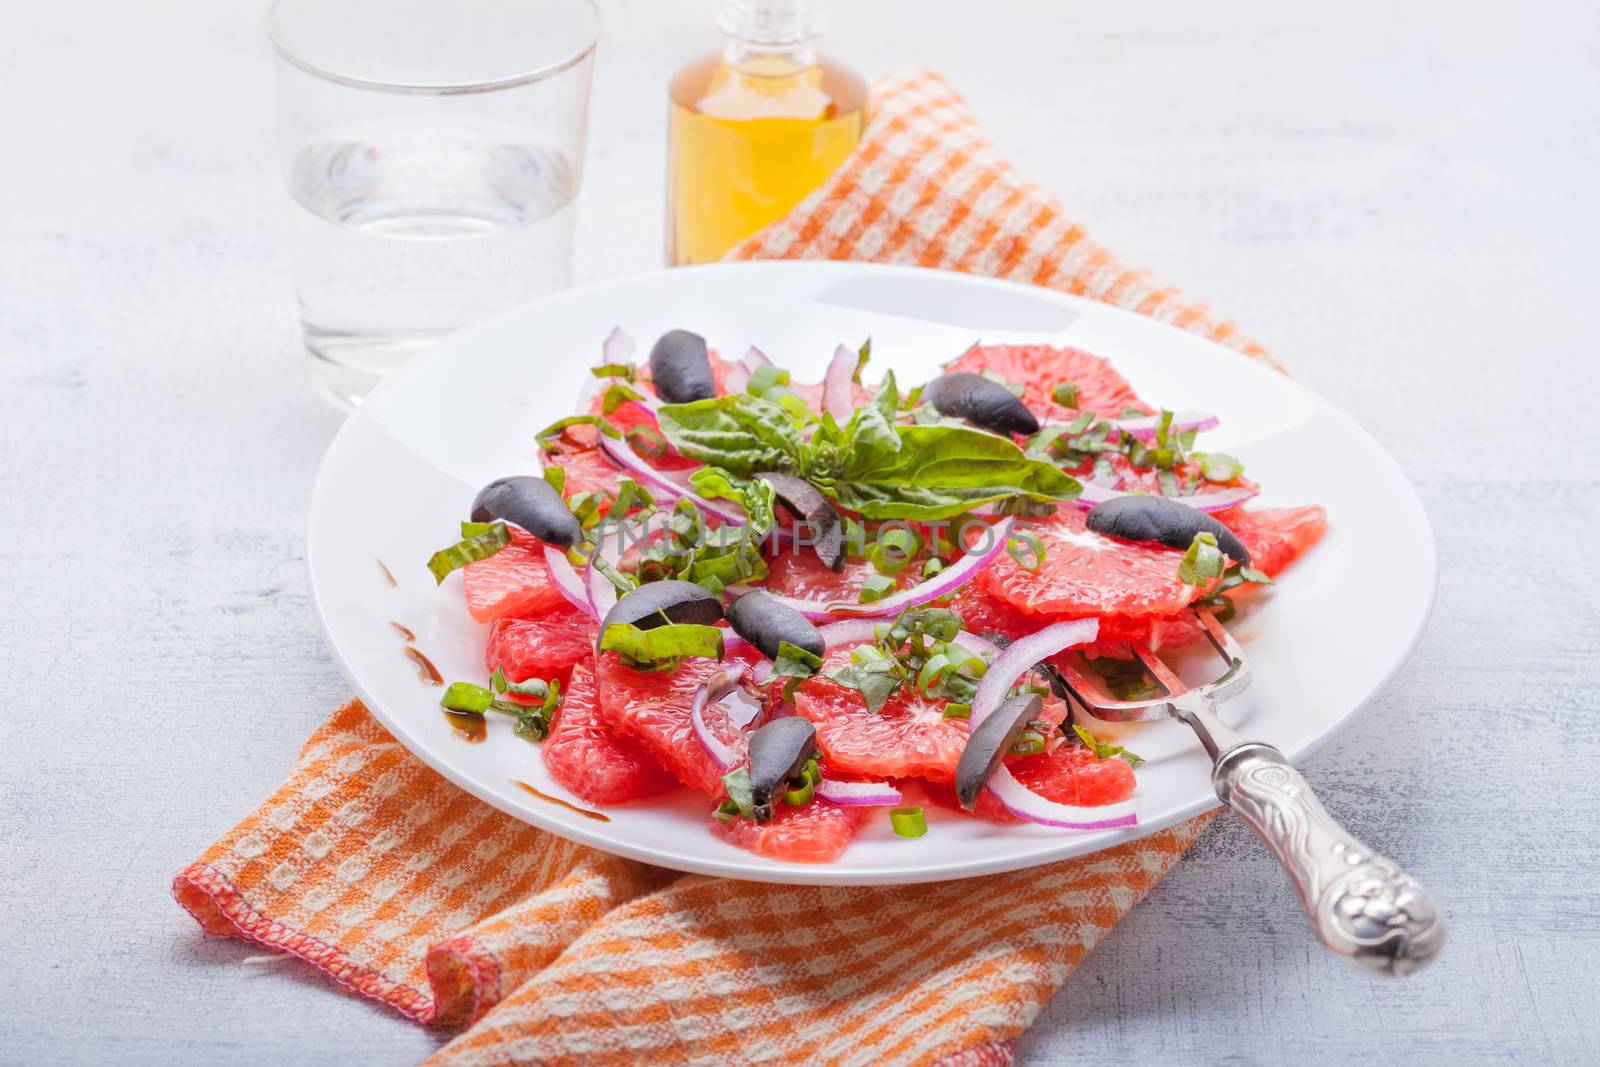 Grapefruit salad with olives, red onion, basil